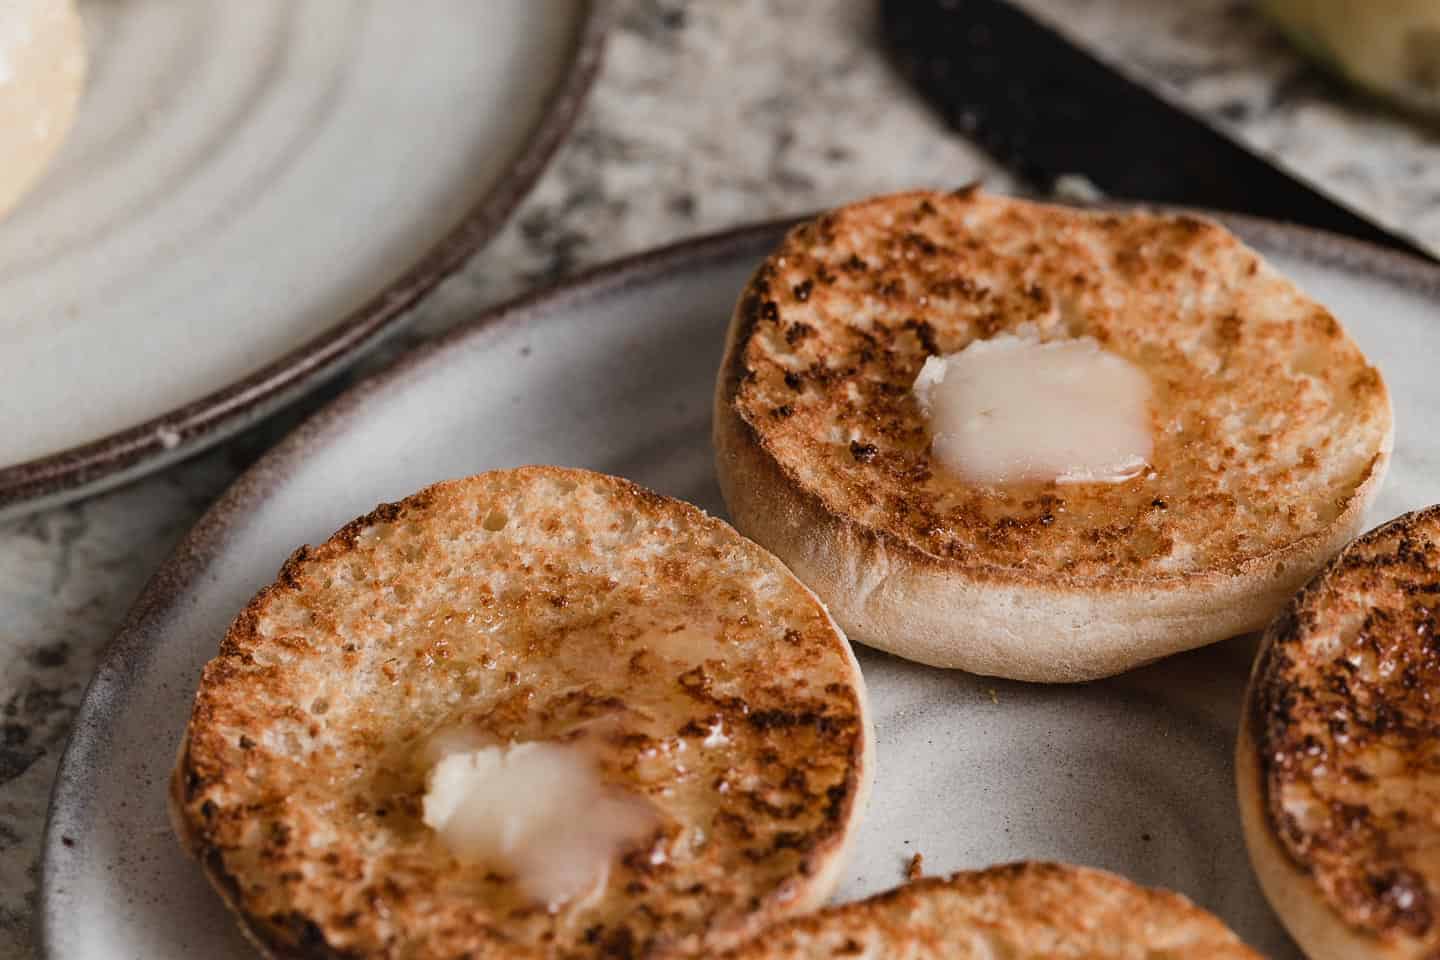 Sourdough english muffins toasted with melted butter on top.